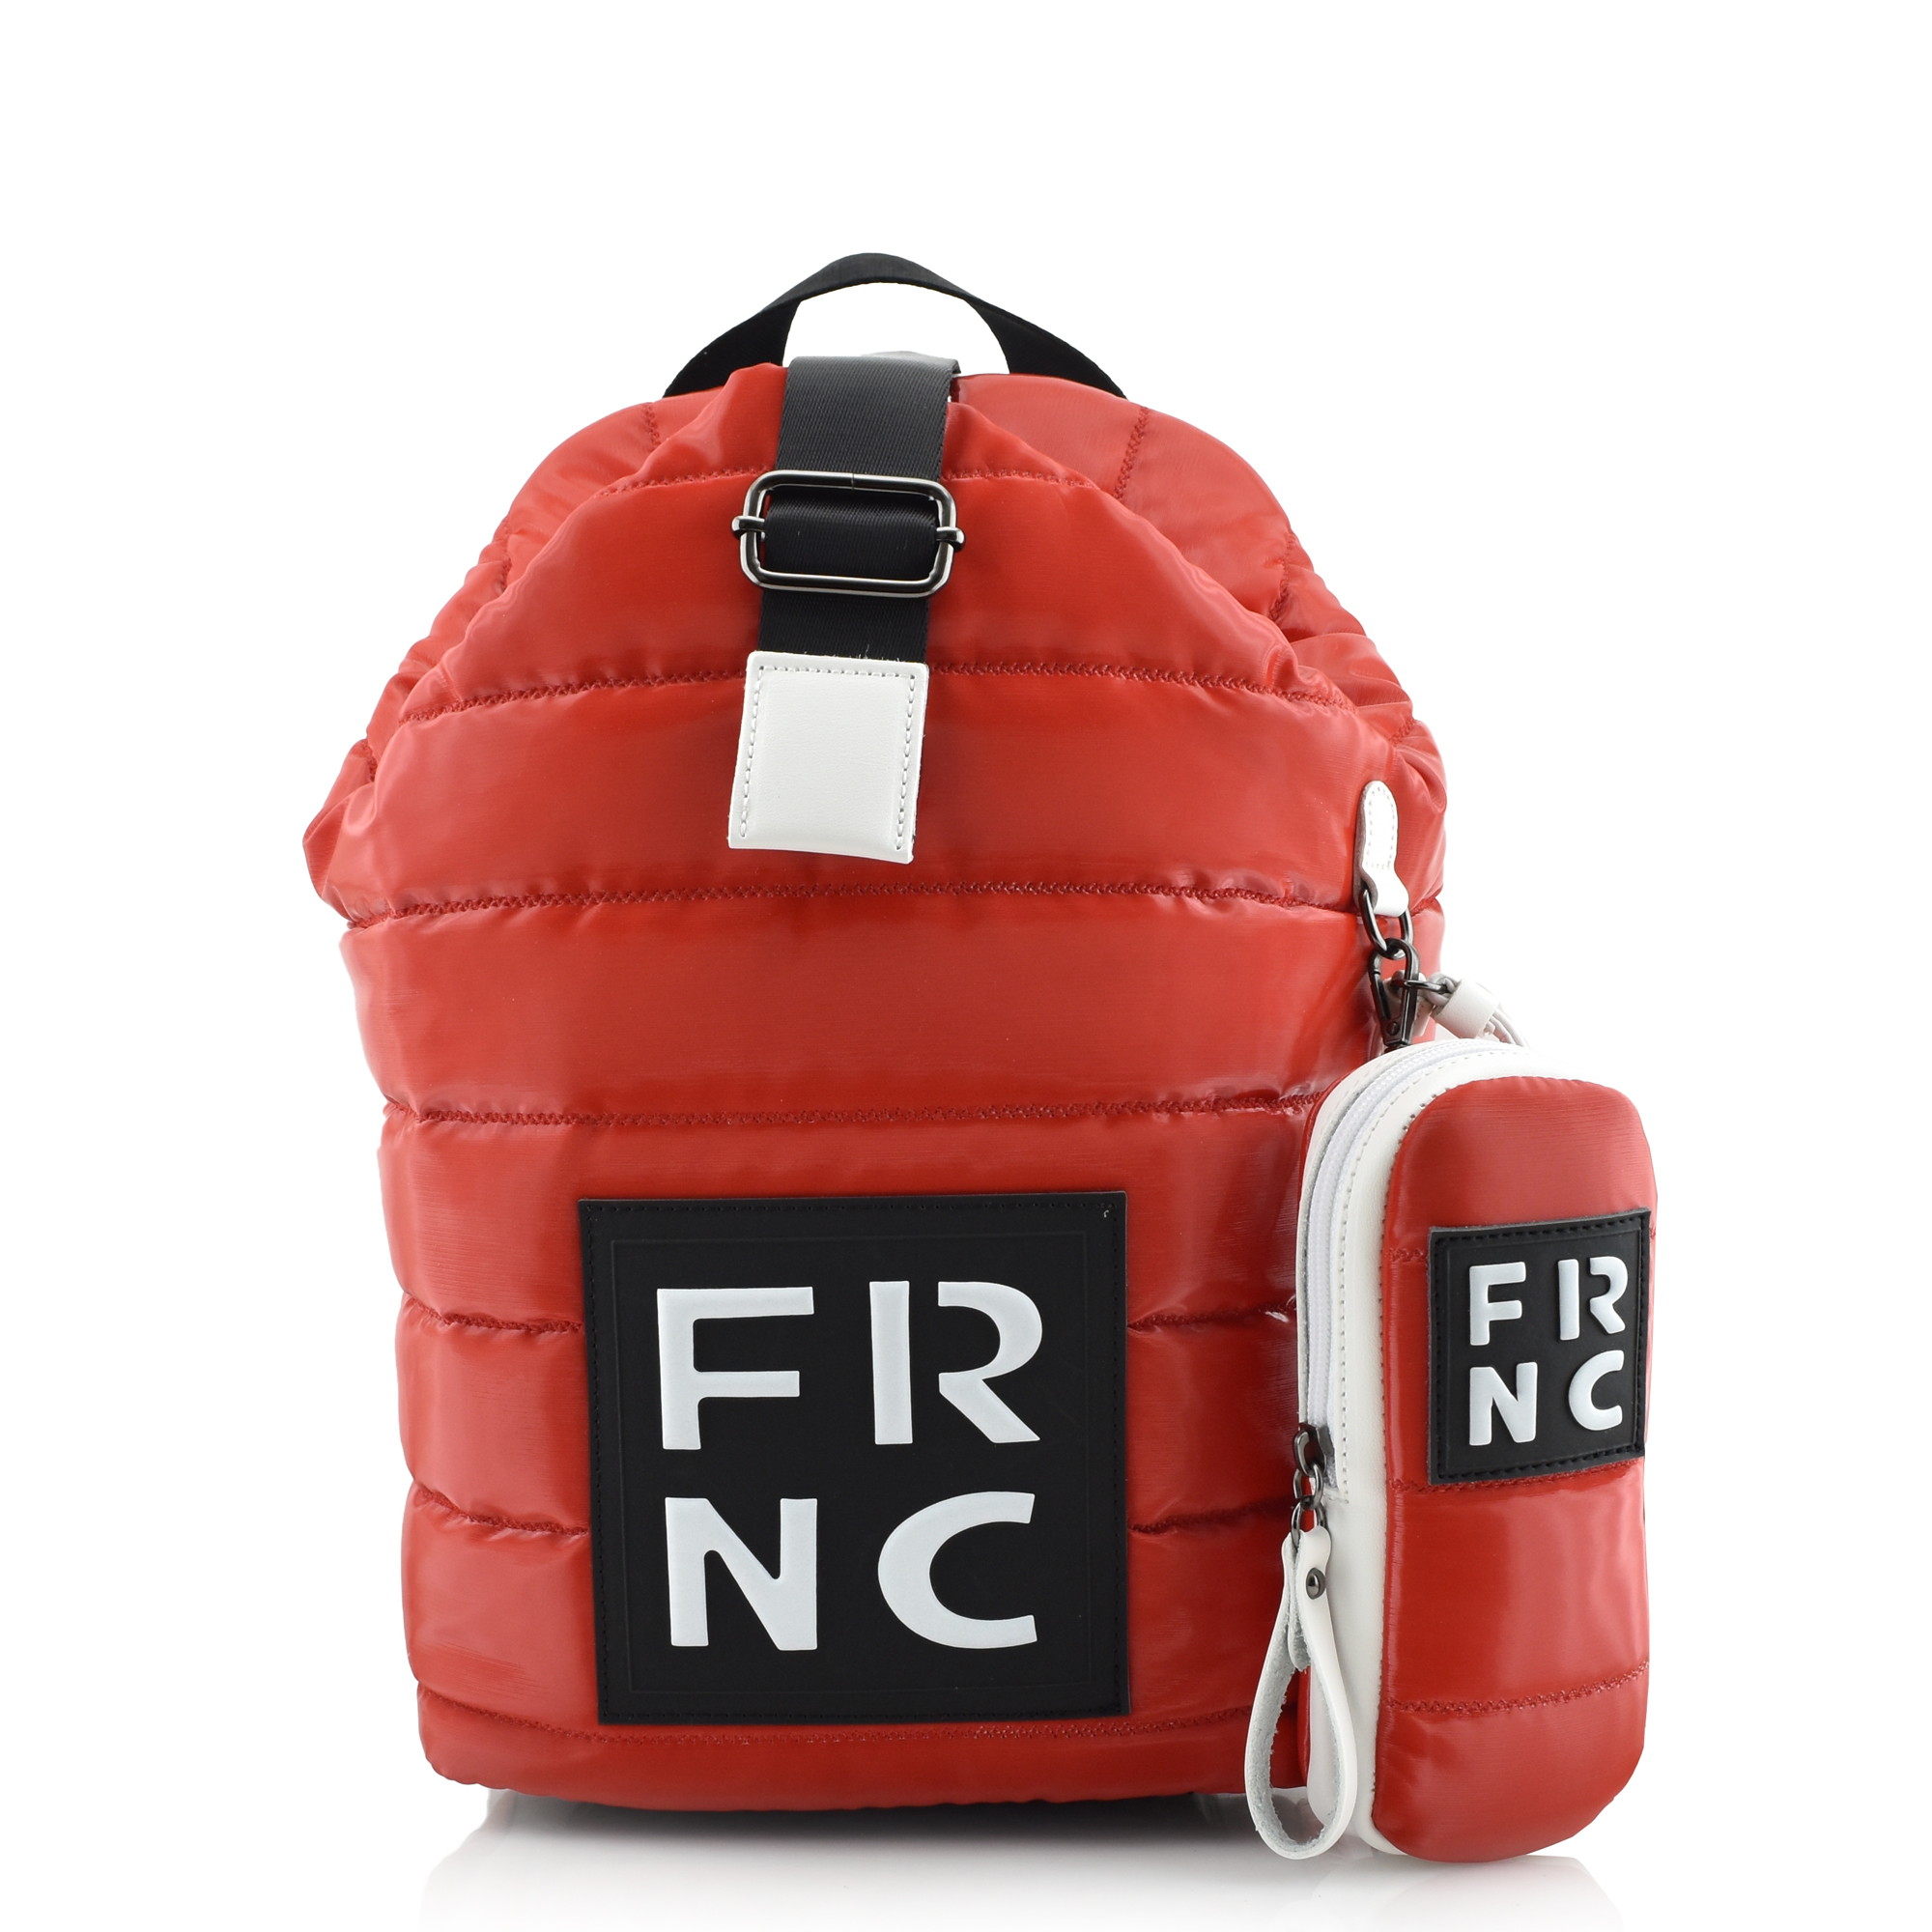 FRNC - FRANCESCO POUCH SHINY BACKPACK - 2301 RED